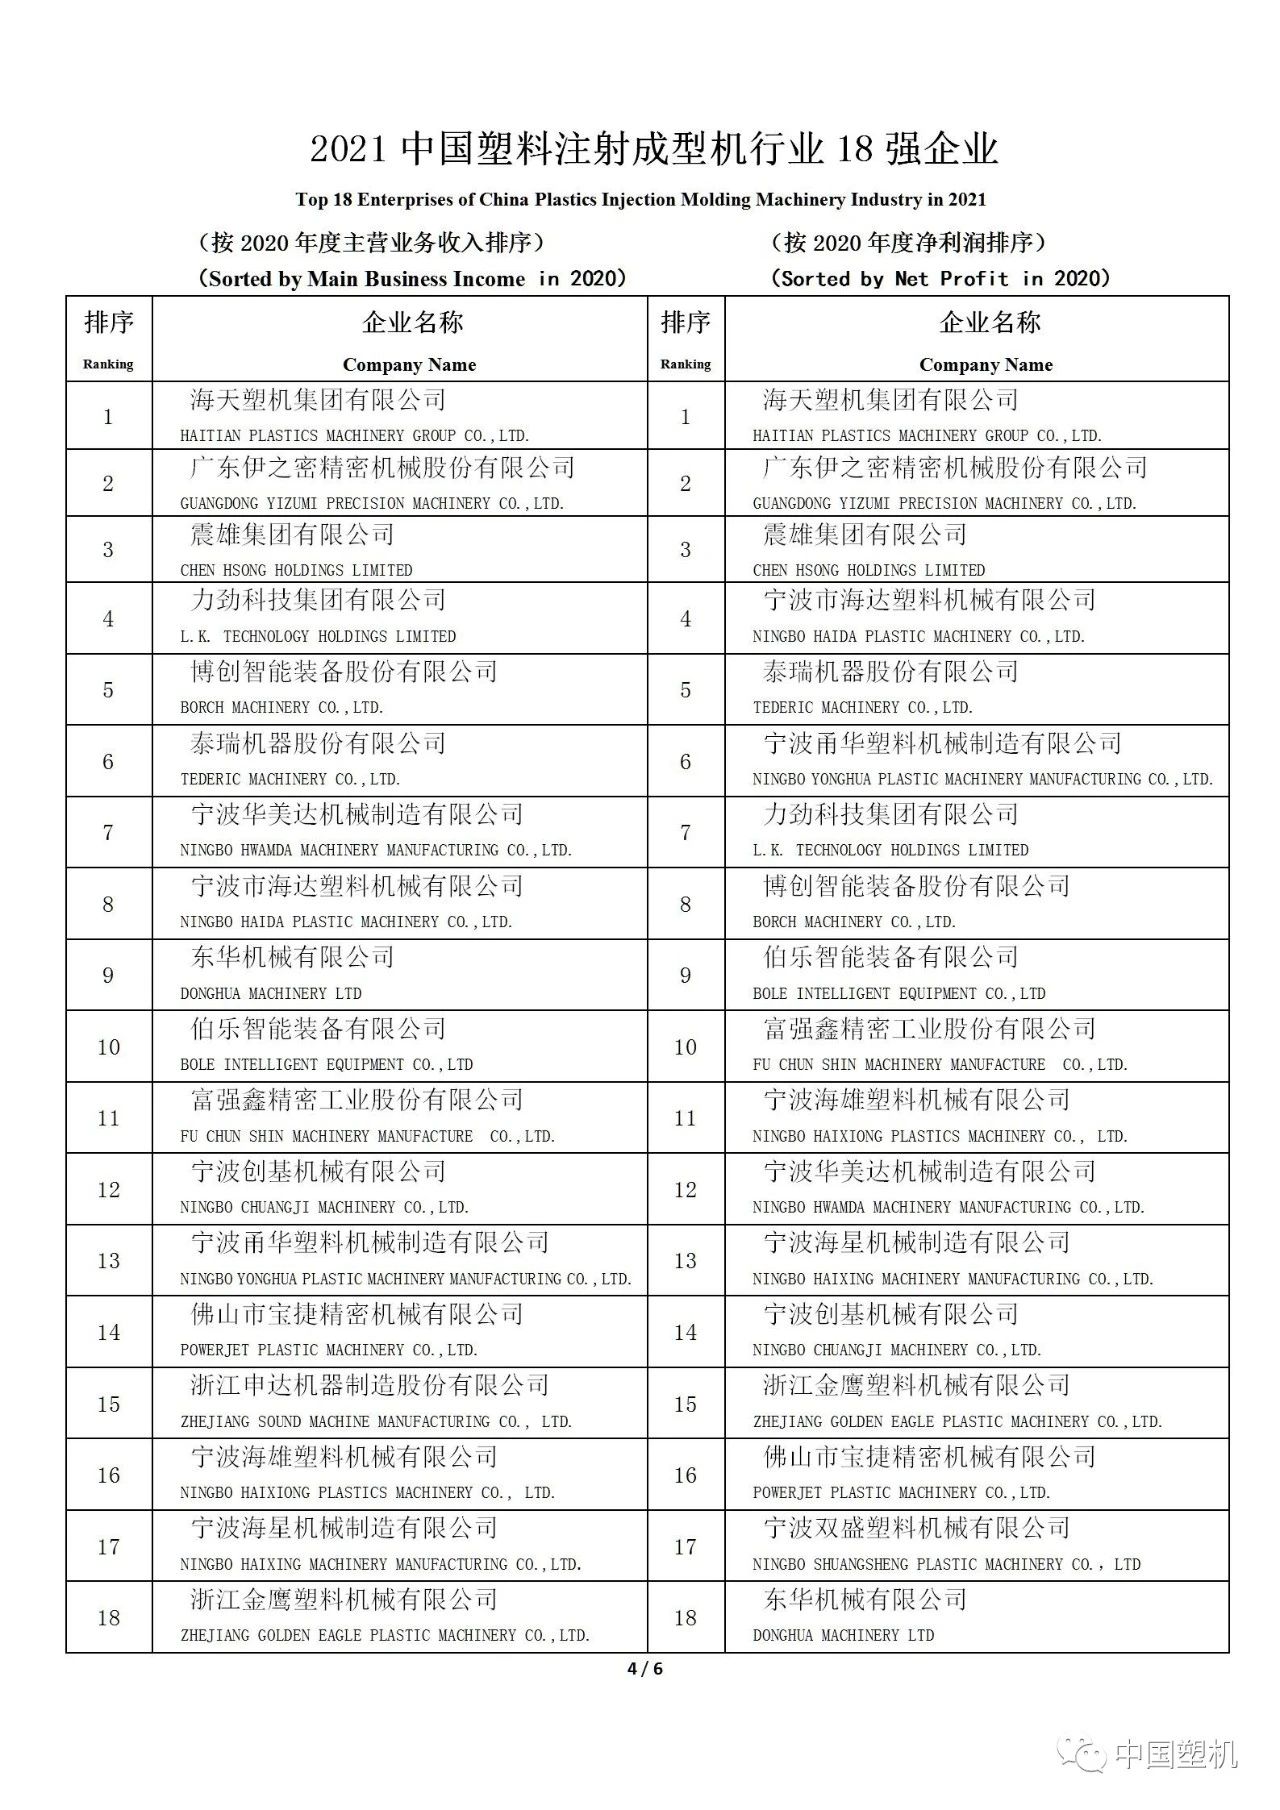 Picture 4 for Shini has been listed among the Top 5 Enterprises of 2021 in China's Plastic Auxiliary Machinery and Accessory Industry